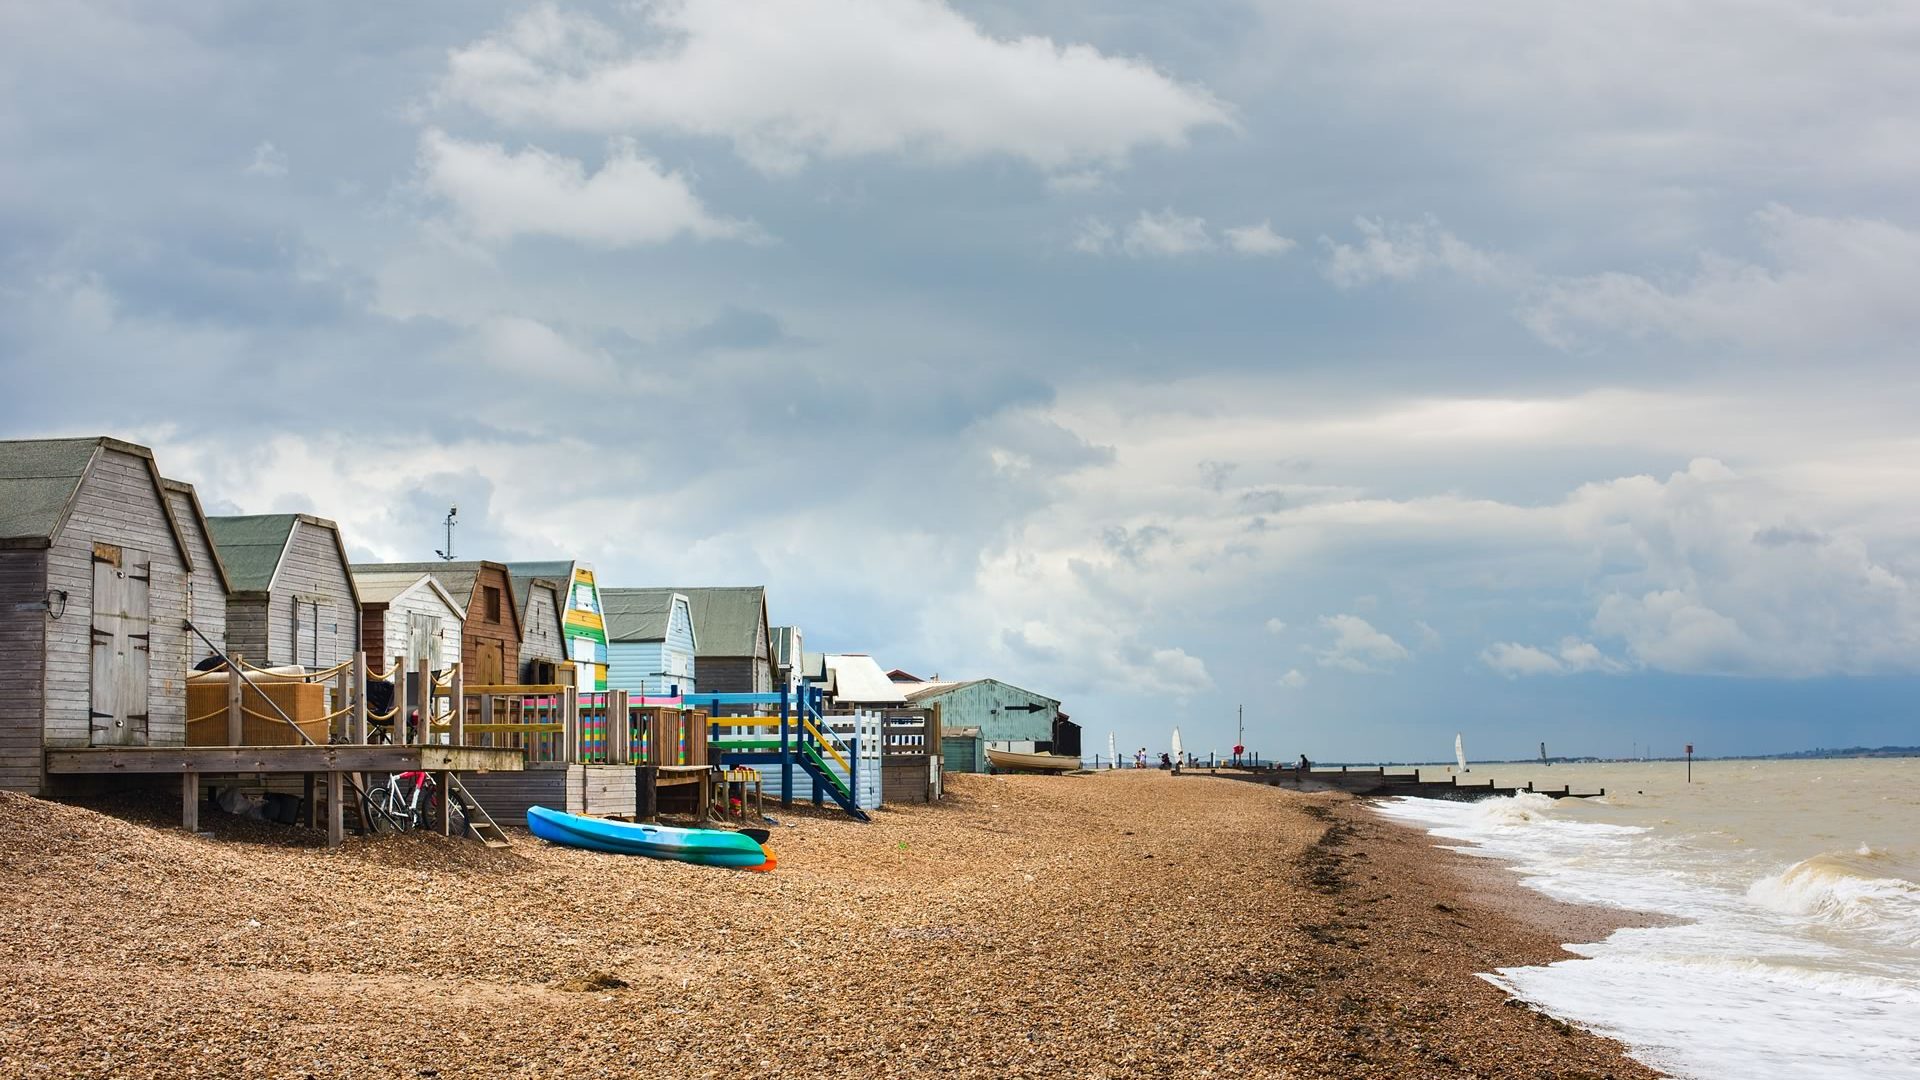 Visit Whitstable